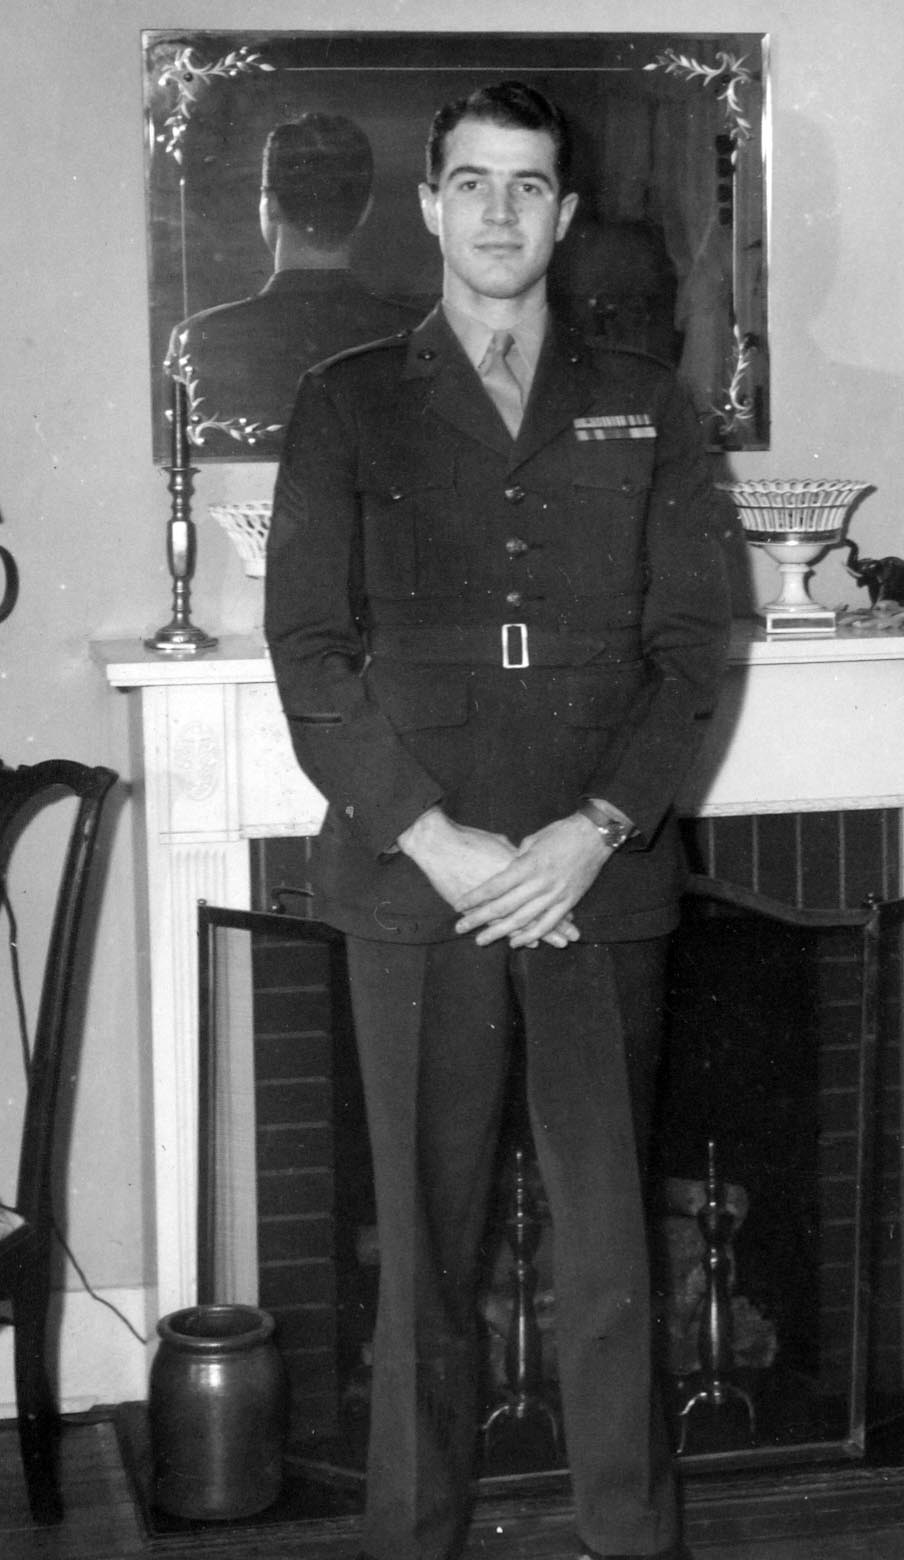 Pete in the Marines 1947